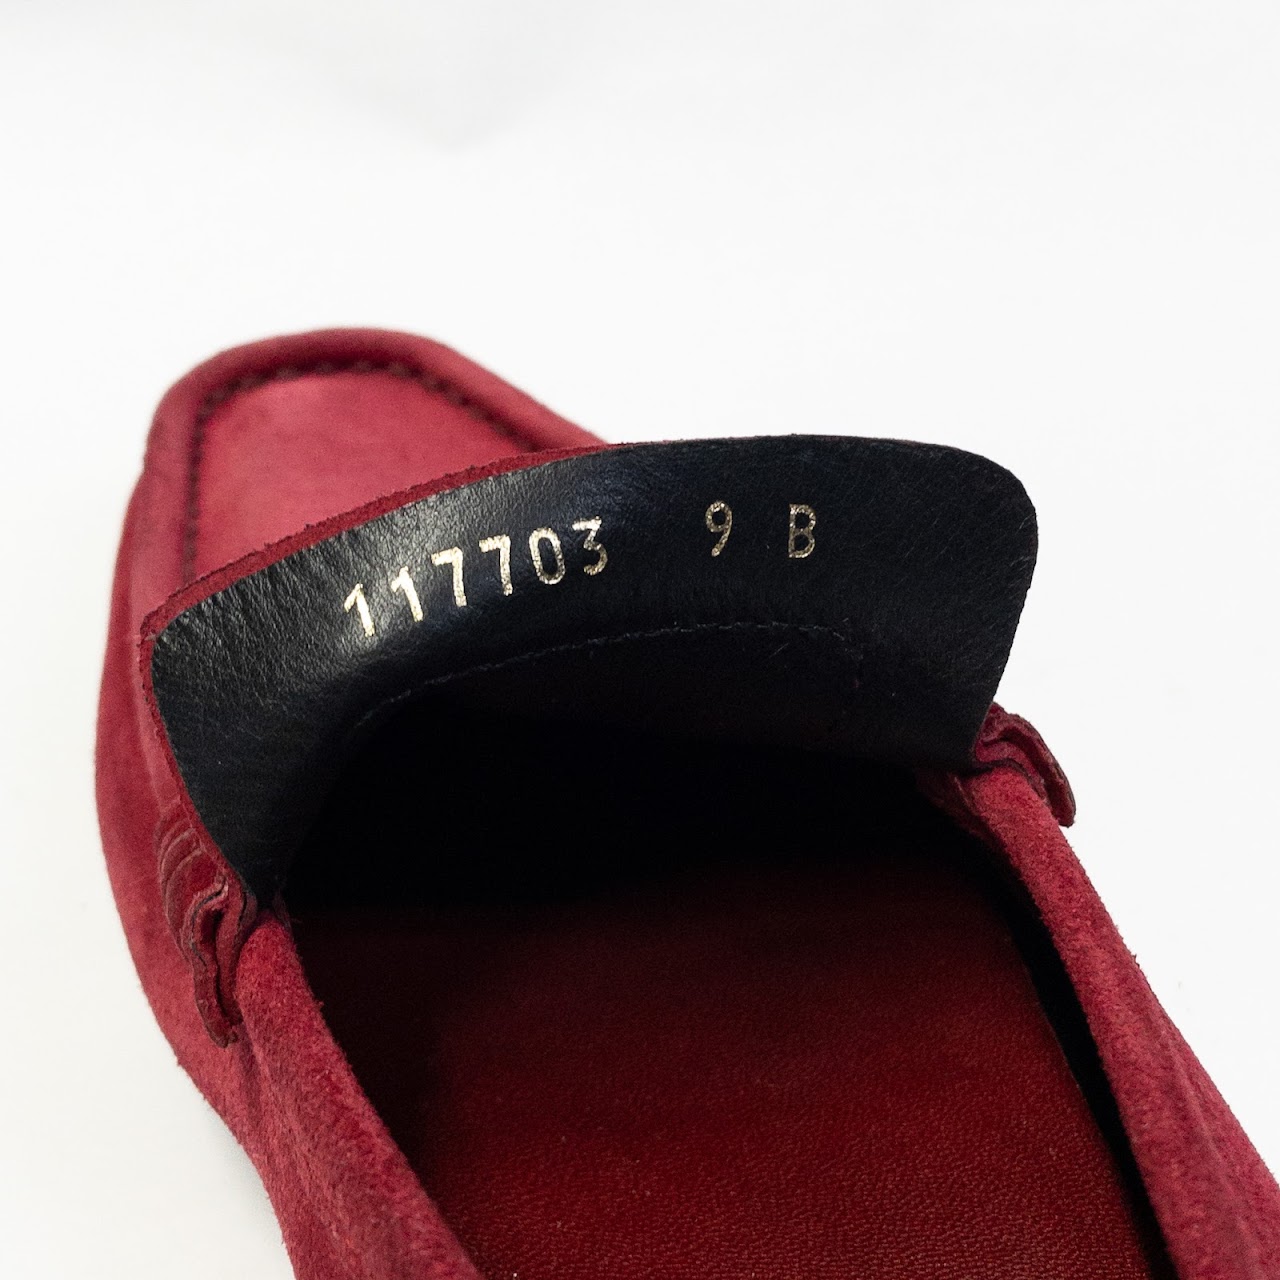 Gucci Red Suede Loafers